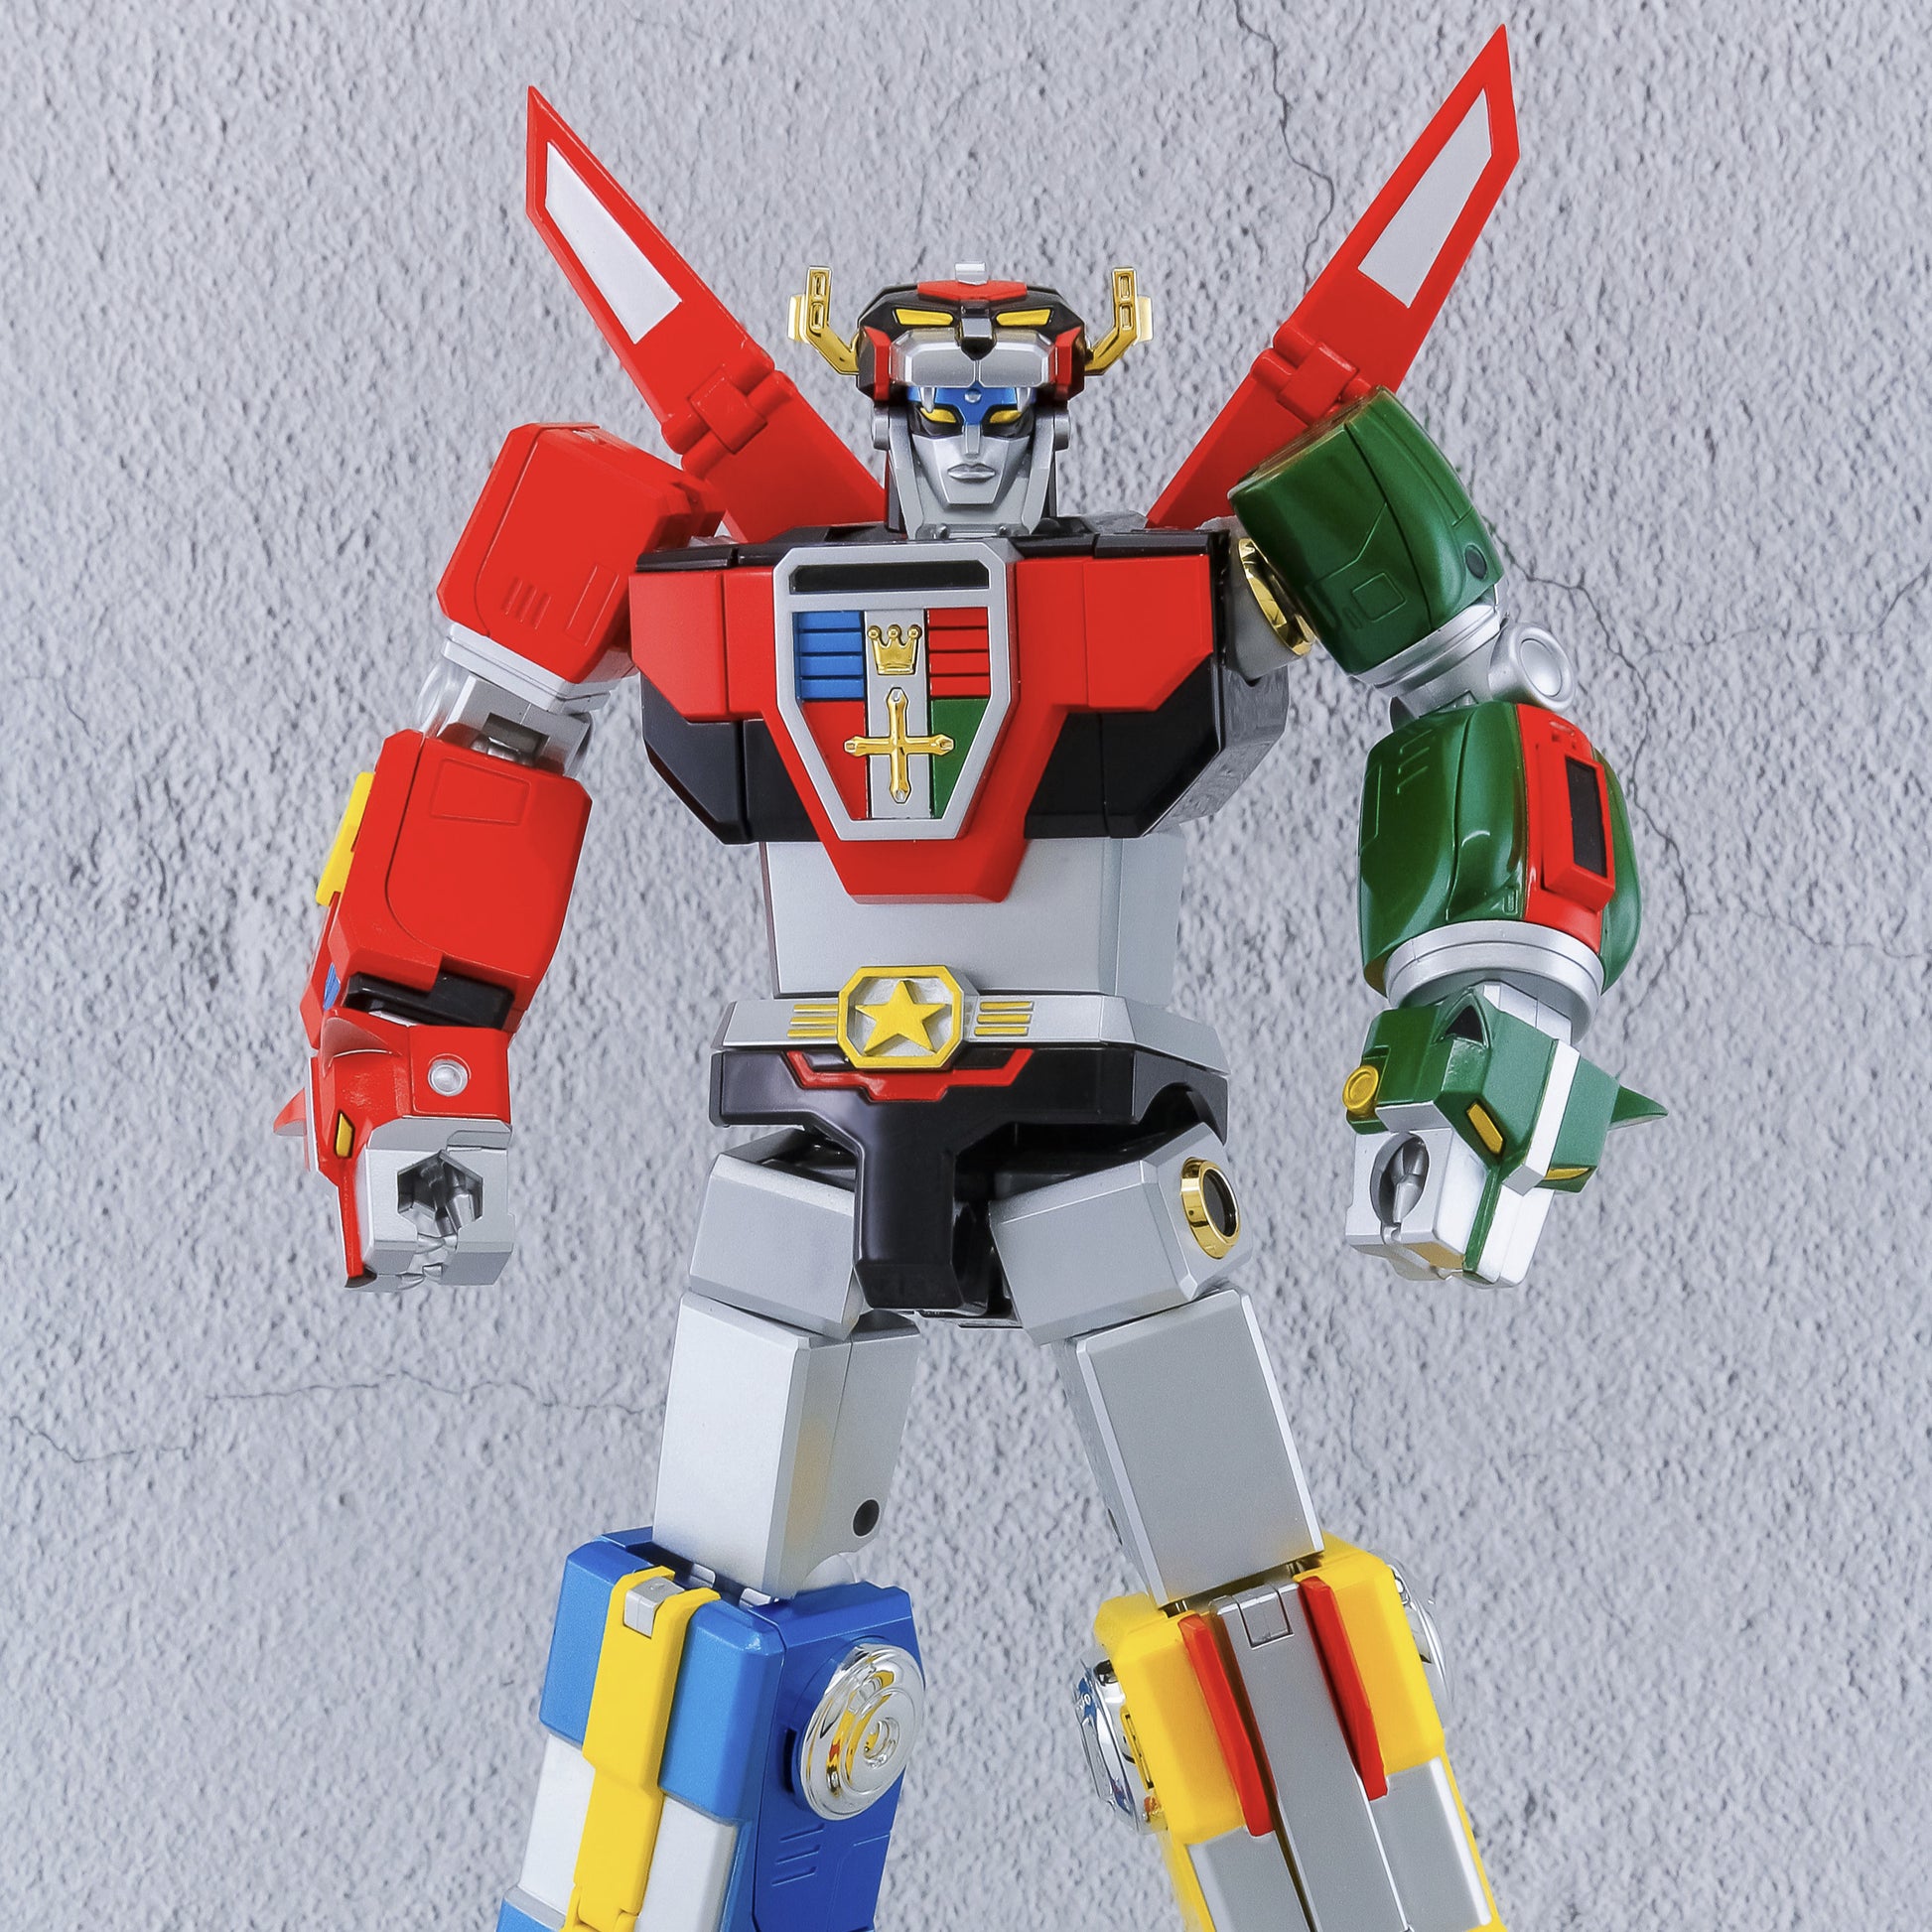 Action Toys Action Gokin Series Voltron Lion standing